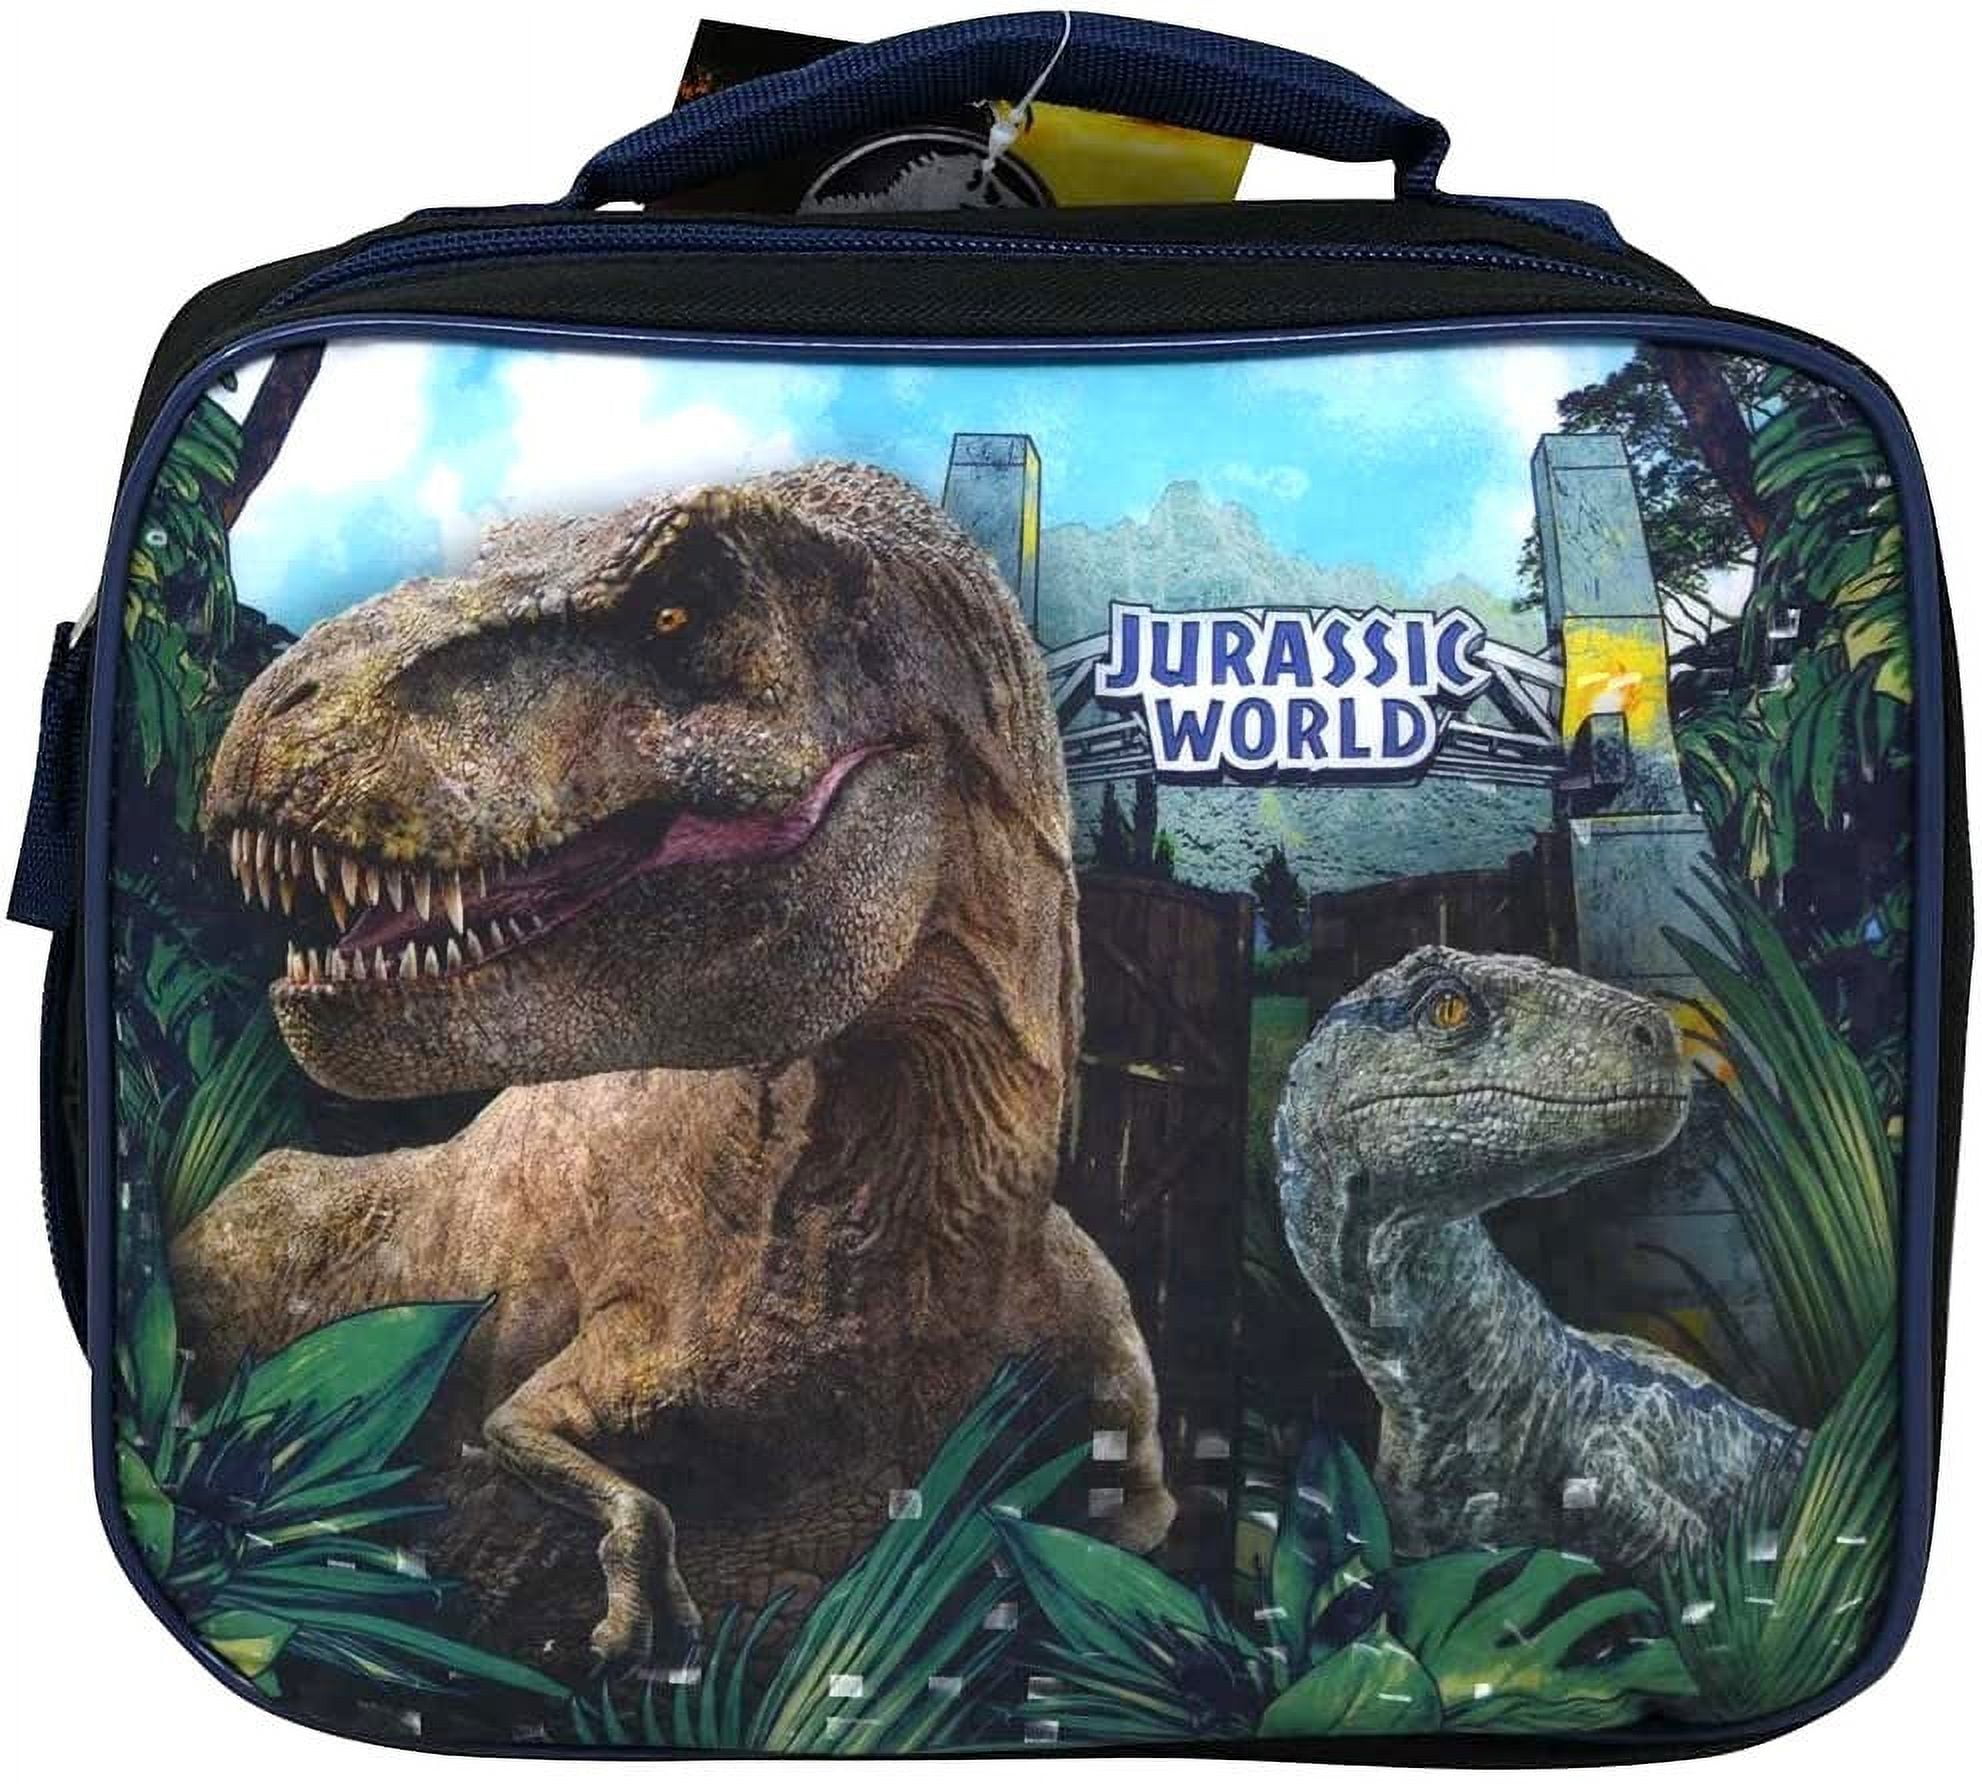 Fast Forward Jurassic Park Lunch Box Kids - Bundle with Dinosaur Lunch Box for Boys, Water Bottle, Stickers, More (T-Rex Lunch Bag)